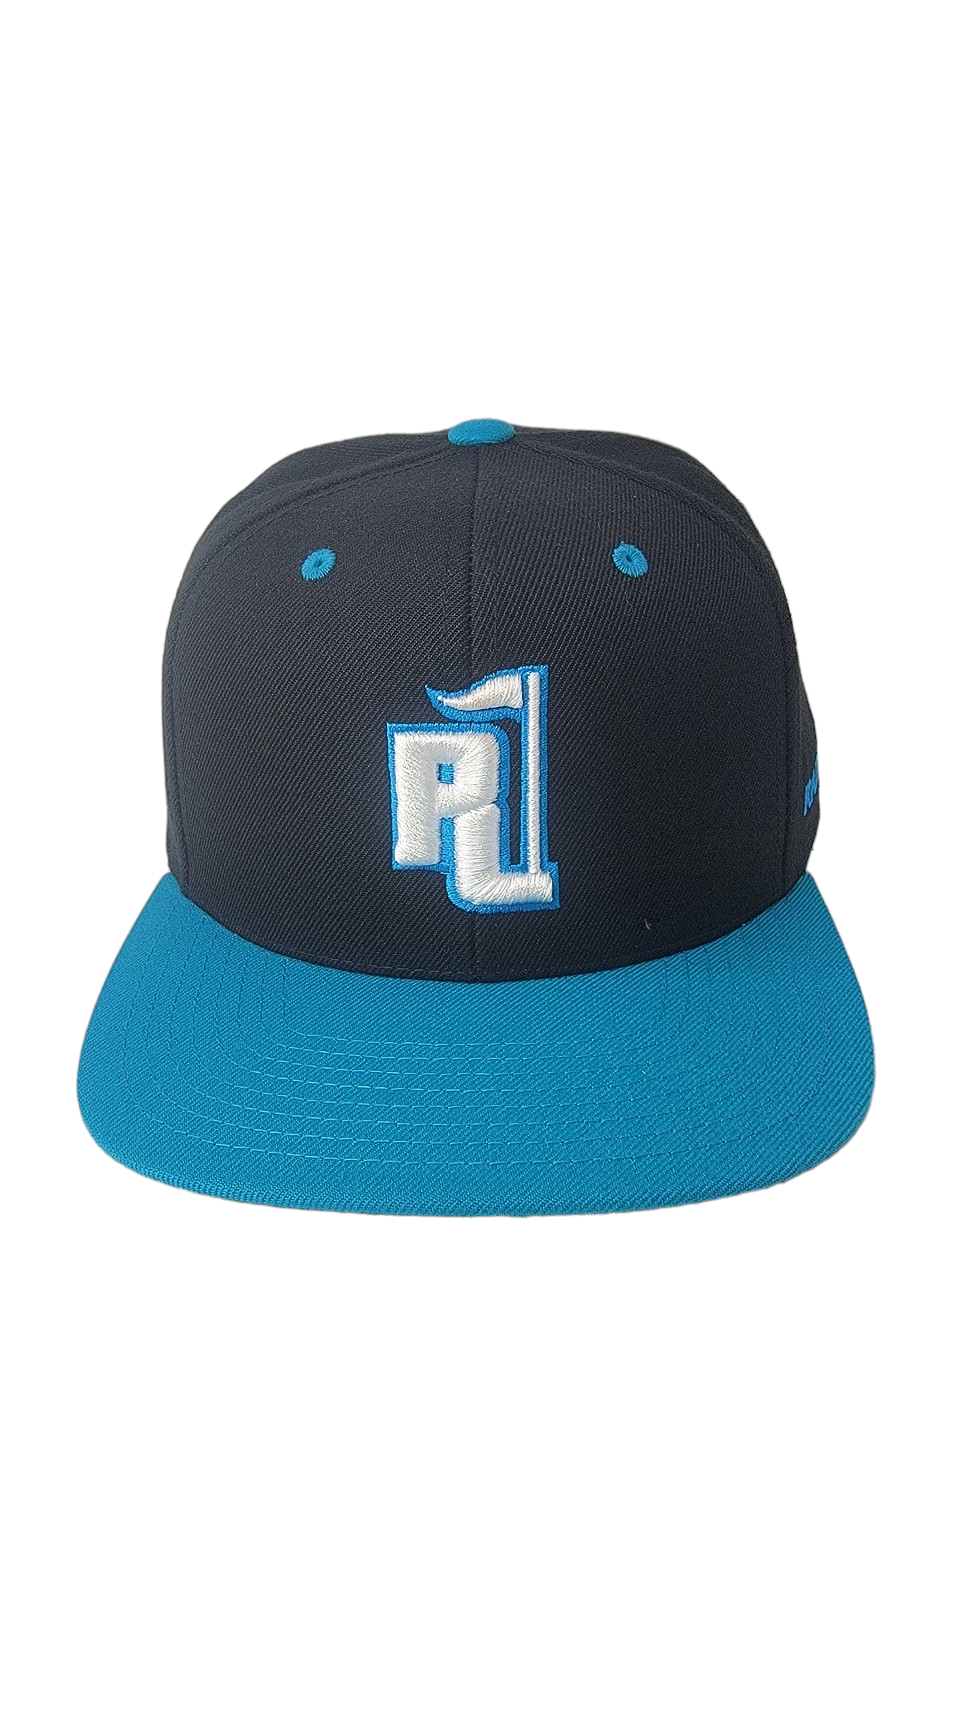 Raza Golf Black and Teal Snapback with White and Teal Logo